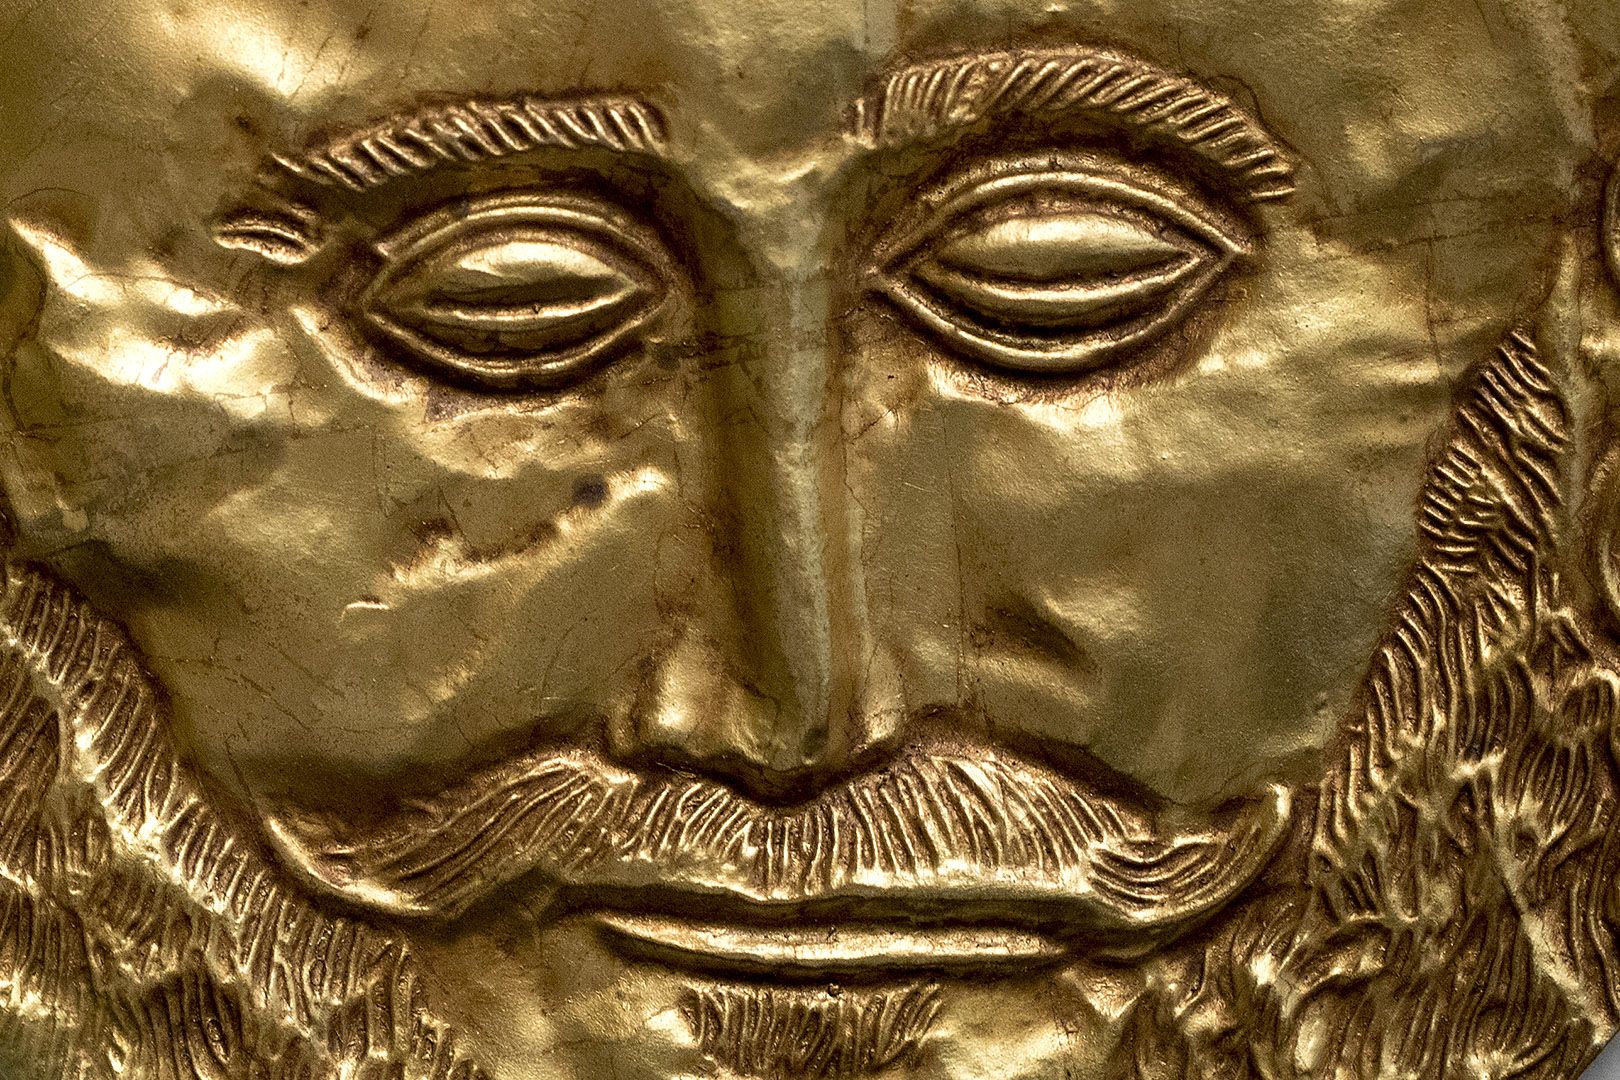 Look What We Found: Death Mask of Agamemnon | News | College